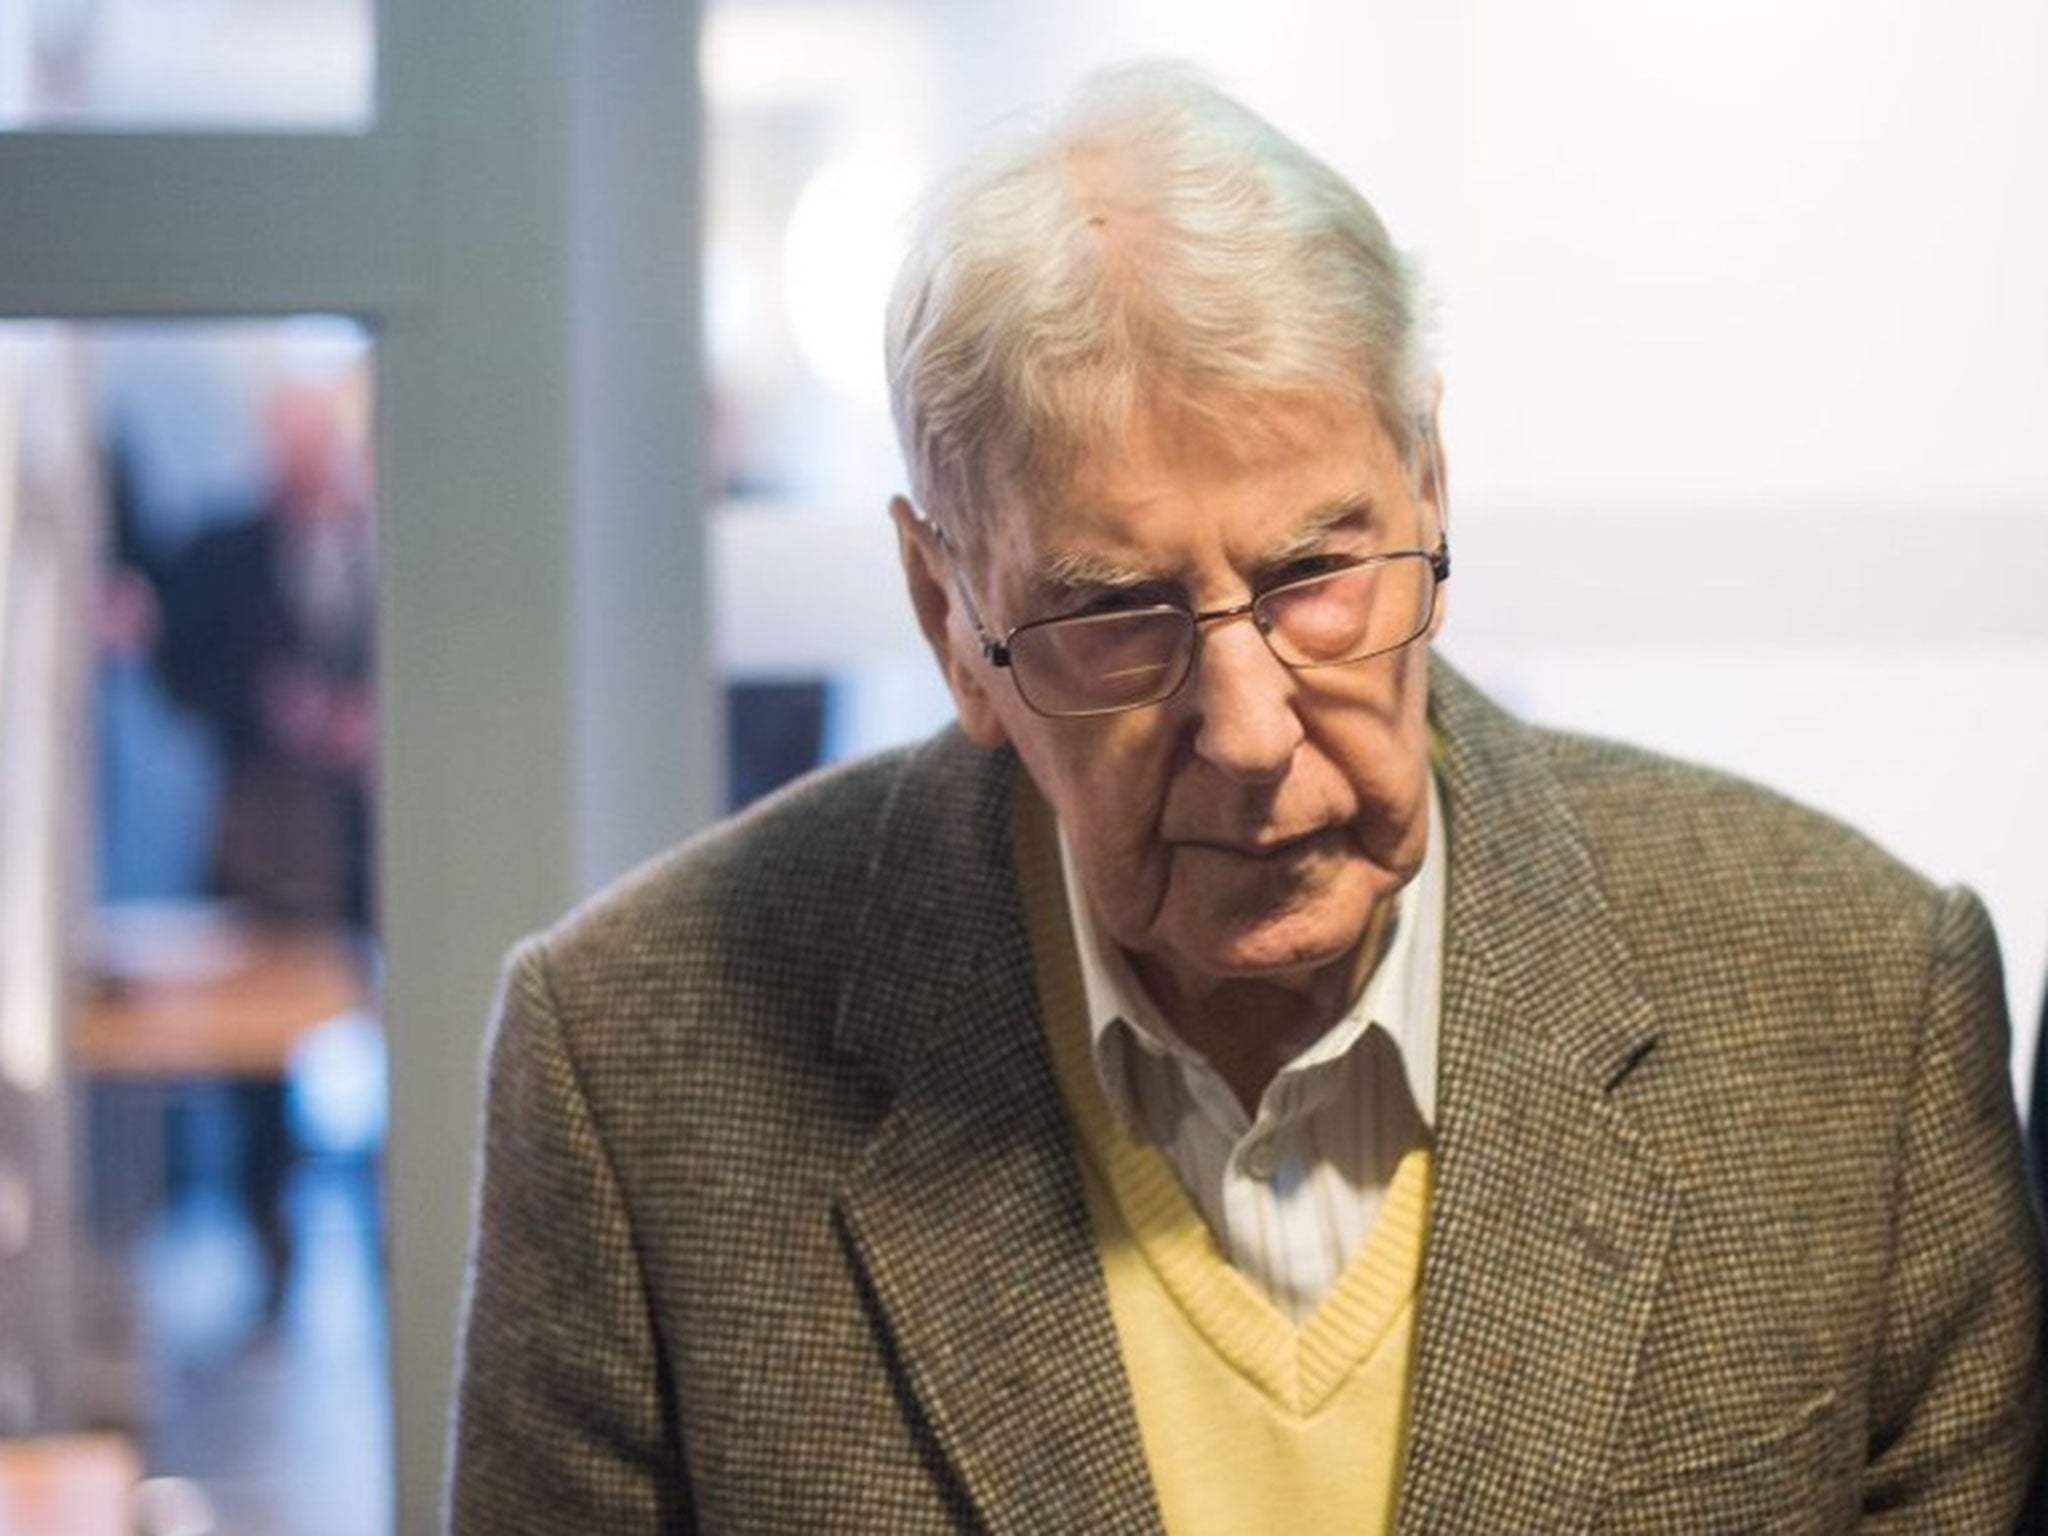 Reinhold Hanning denies being involved in the mass killings at the Auschwitz death camp in Nazi-controlled Poland